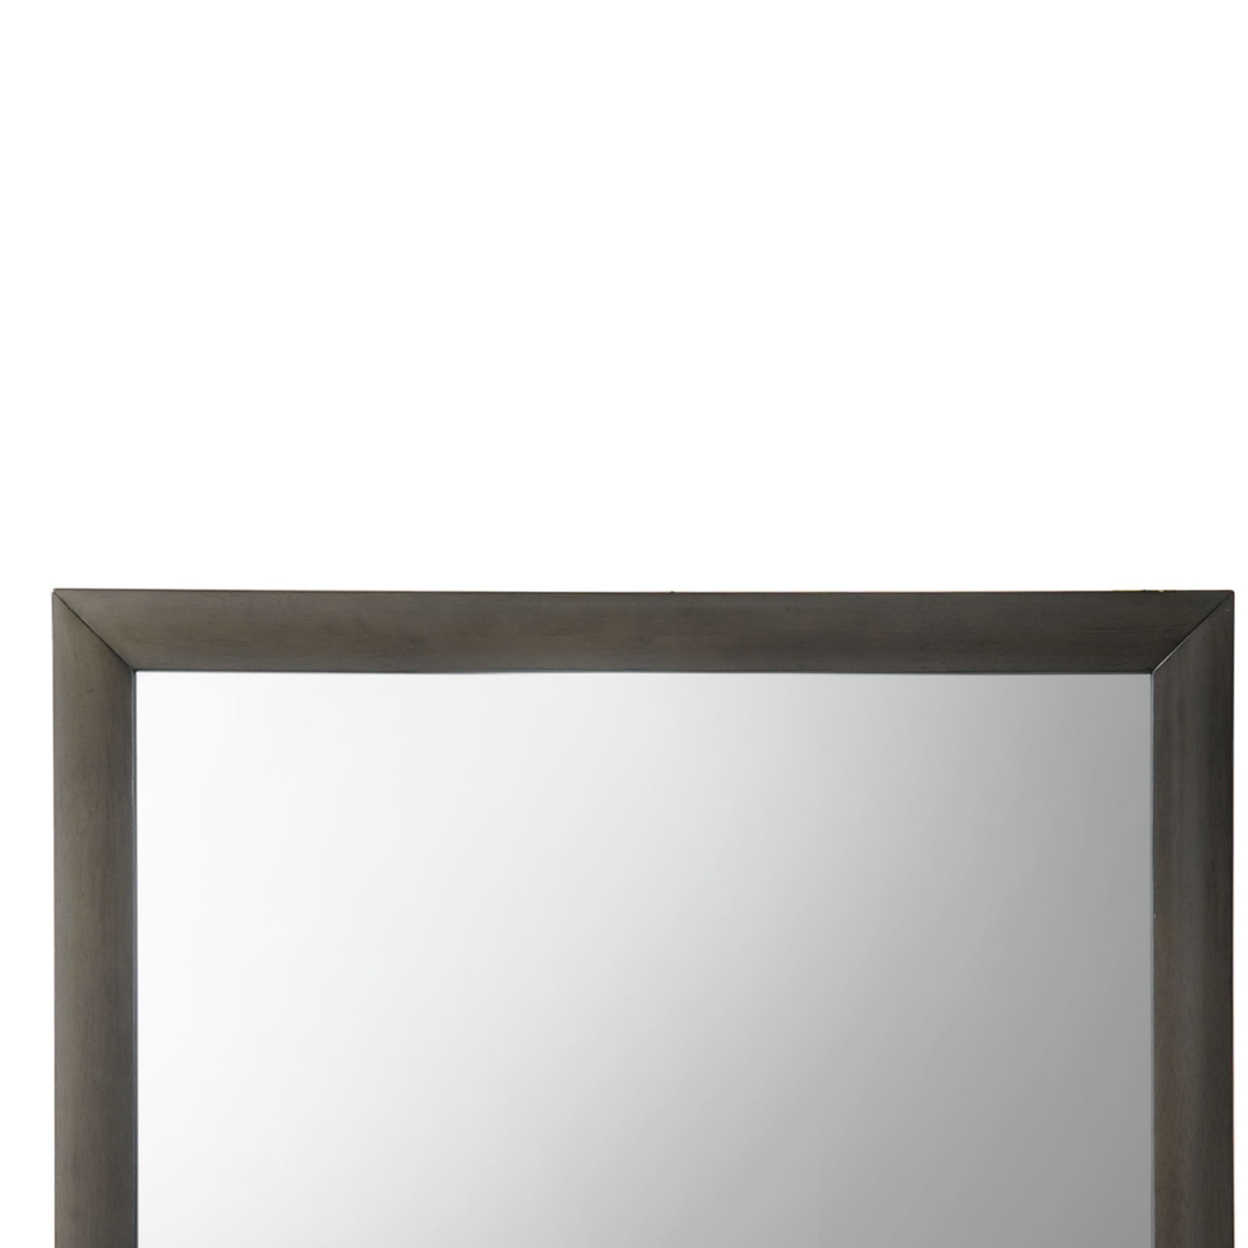 Transition Style Wooden Mirror With Rectangular Shape,Gray And Silver- Saltoro Sherpi